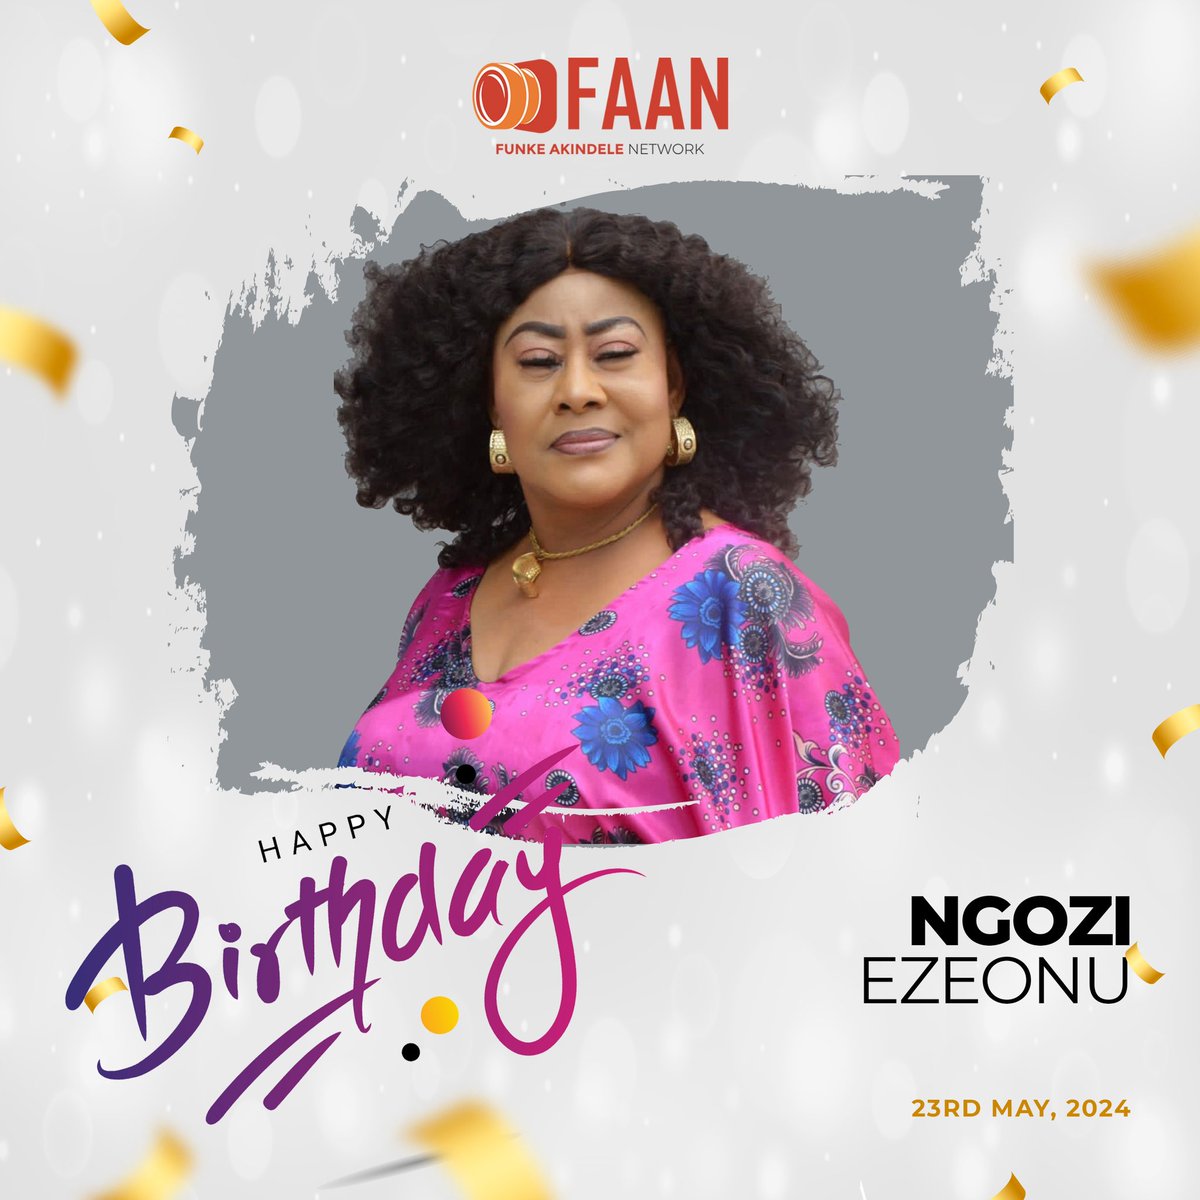 Happy Birthday to the amazing Ngozi Ezeonu! 🎉 

Wishing you a day filled with love, and laughter! Love from FAAN ❤️🎁
.
.
.
#faantv #birthdaywishes #fansoffunkeakindele #funkejenifaakindele #funkeakindelenetwork